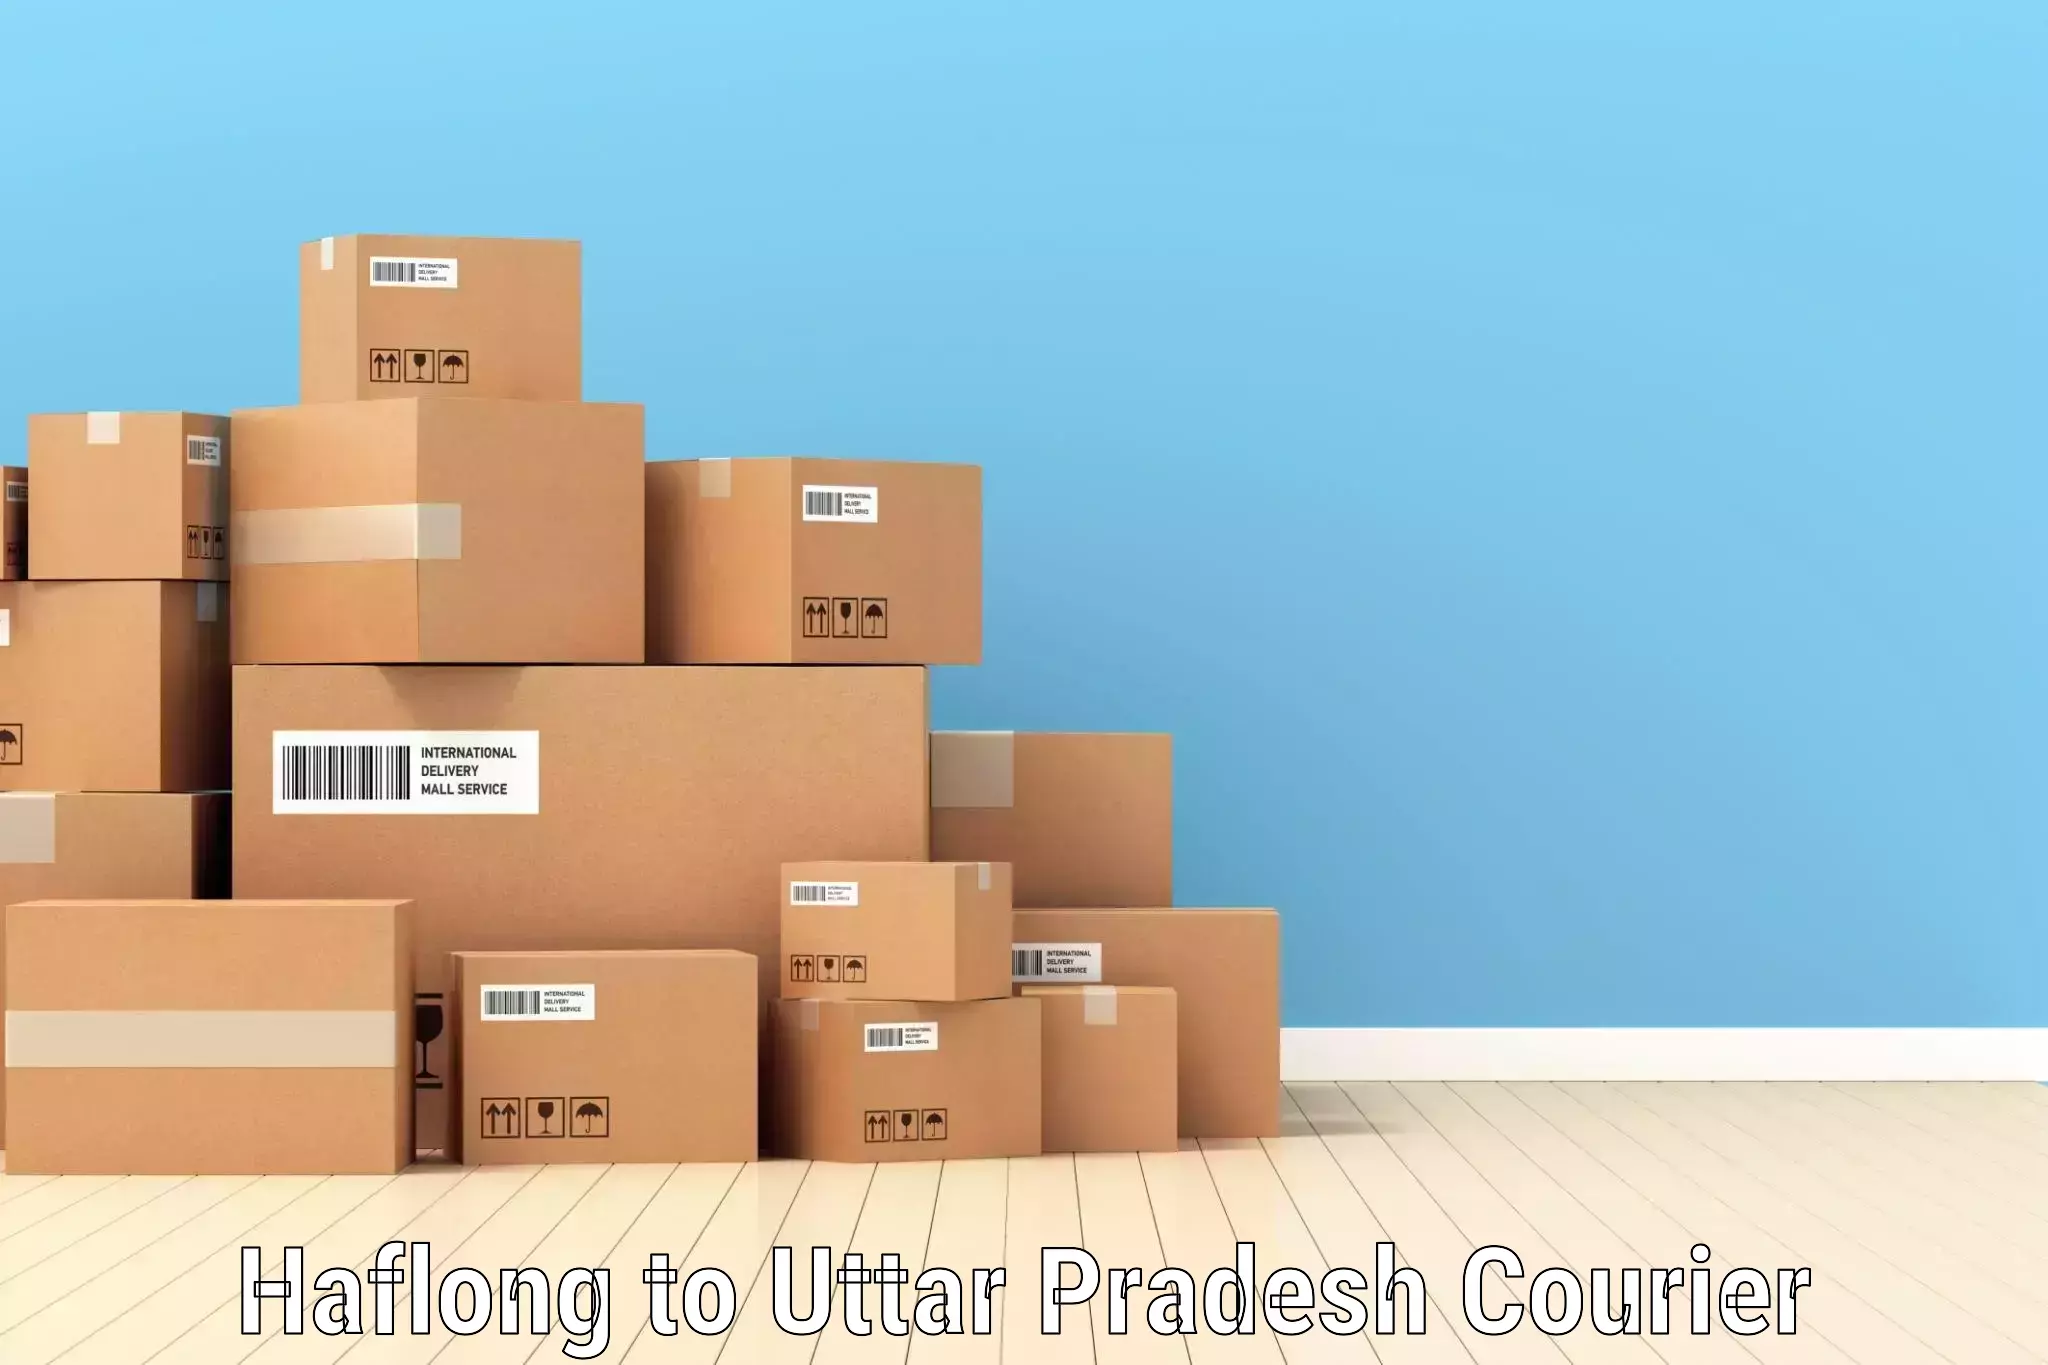 Multi-city courier Haflong to Ghaziabad